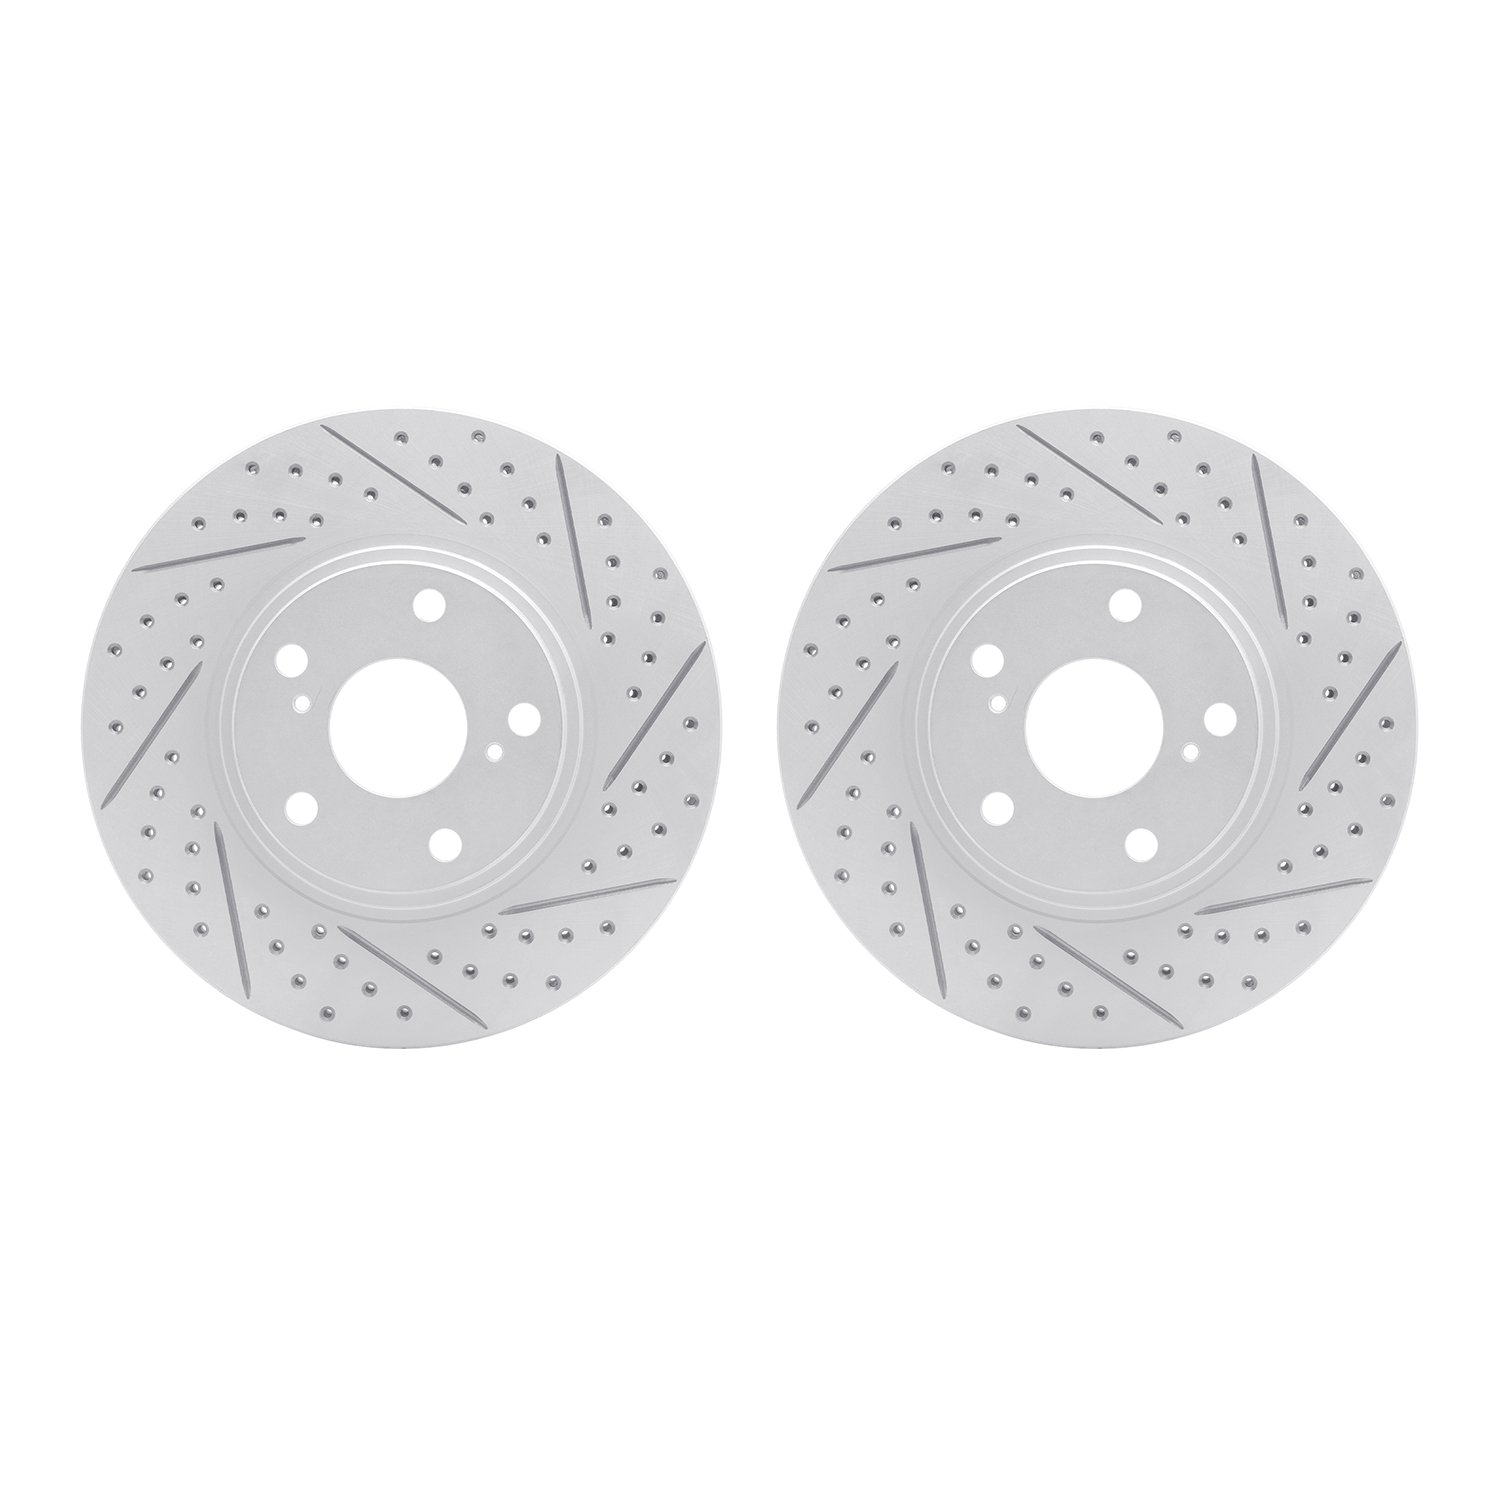 2002-76004 Geoperformance Drilled/Slotted Brake Rotors, 1999-2007 Lexus/Toyota/Scion, Position: Front